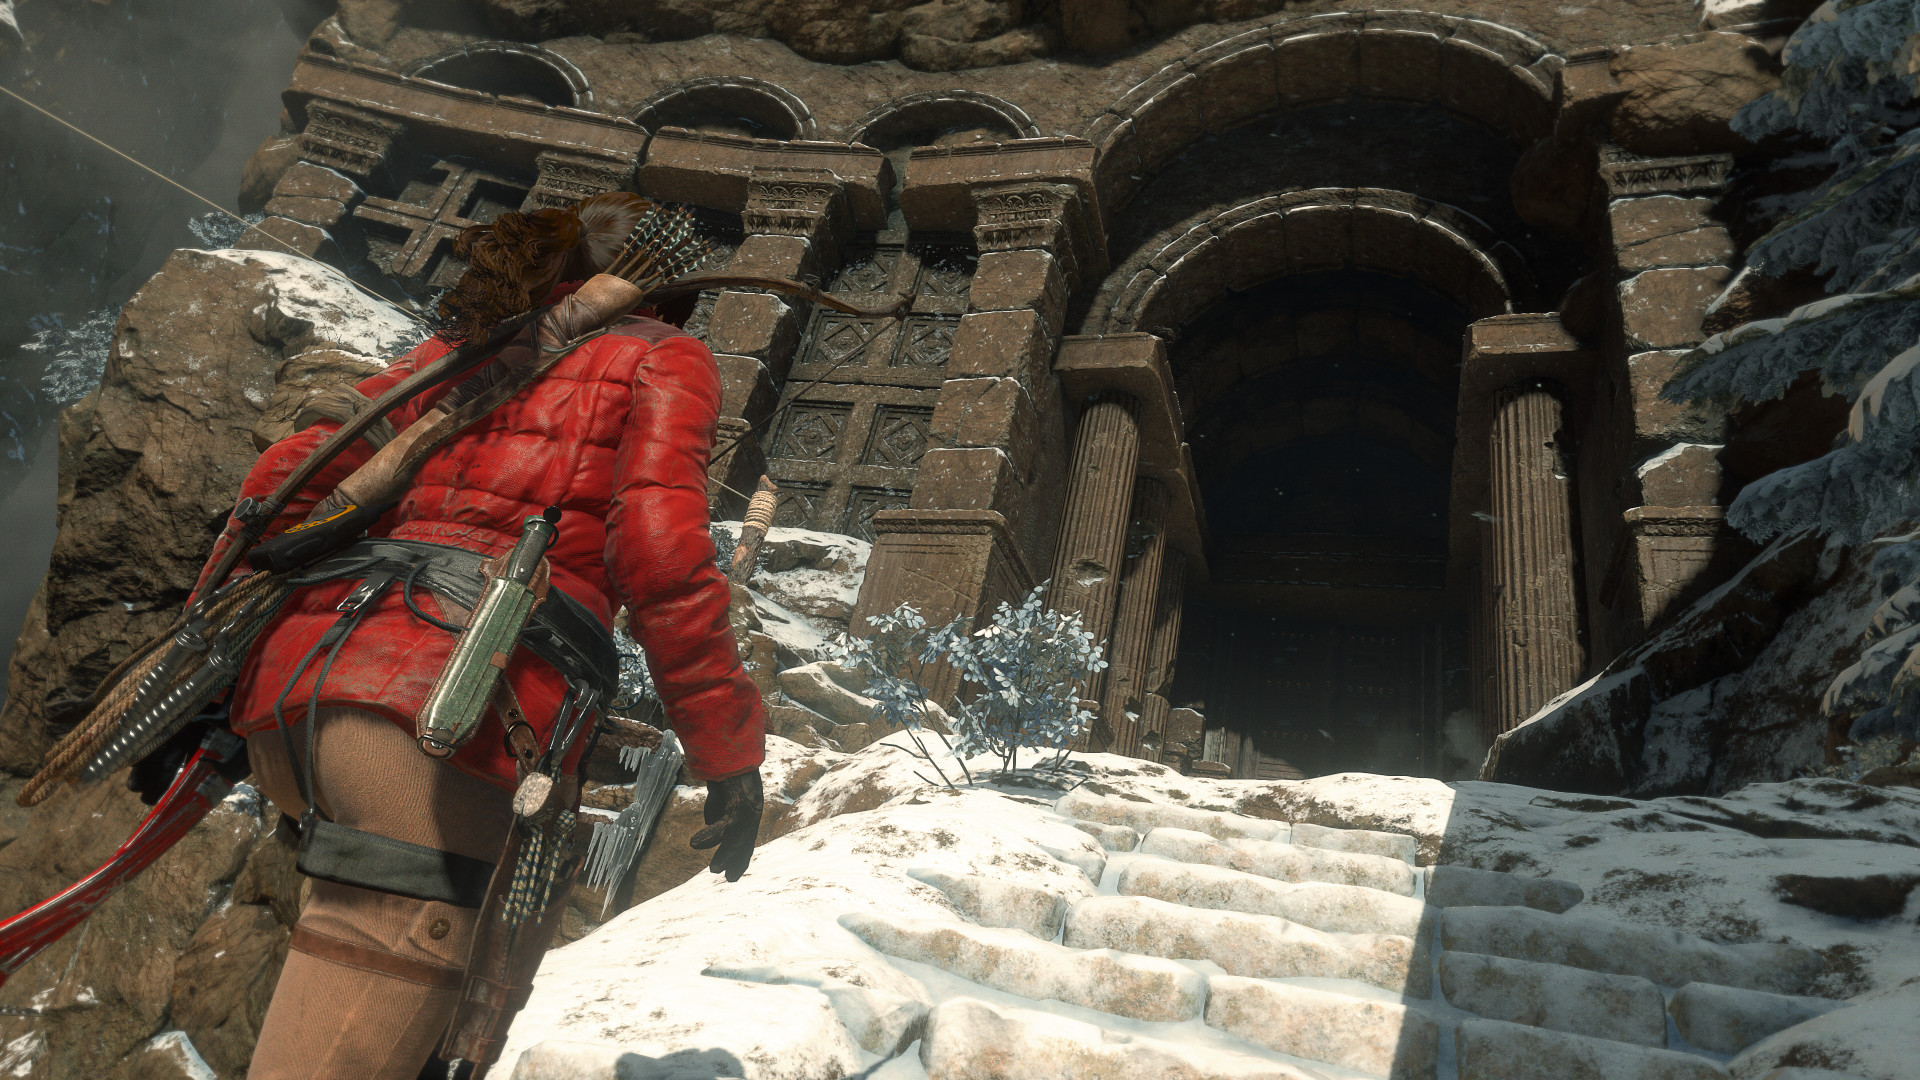 Rise of the Tomb Raider™ on Steam